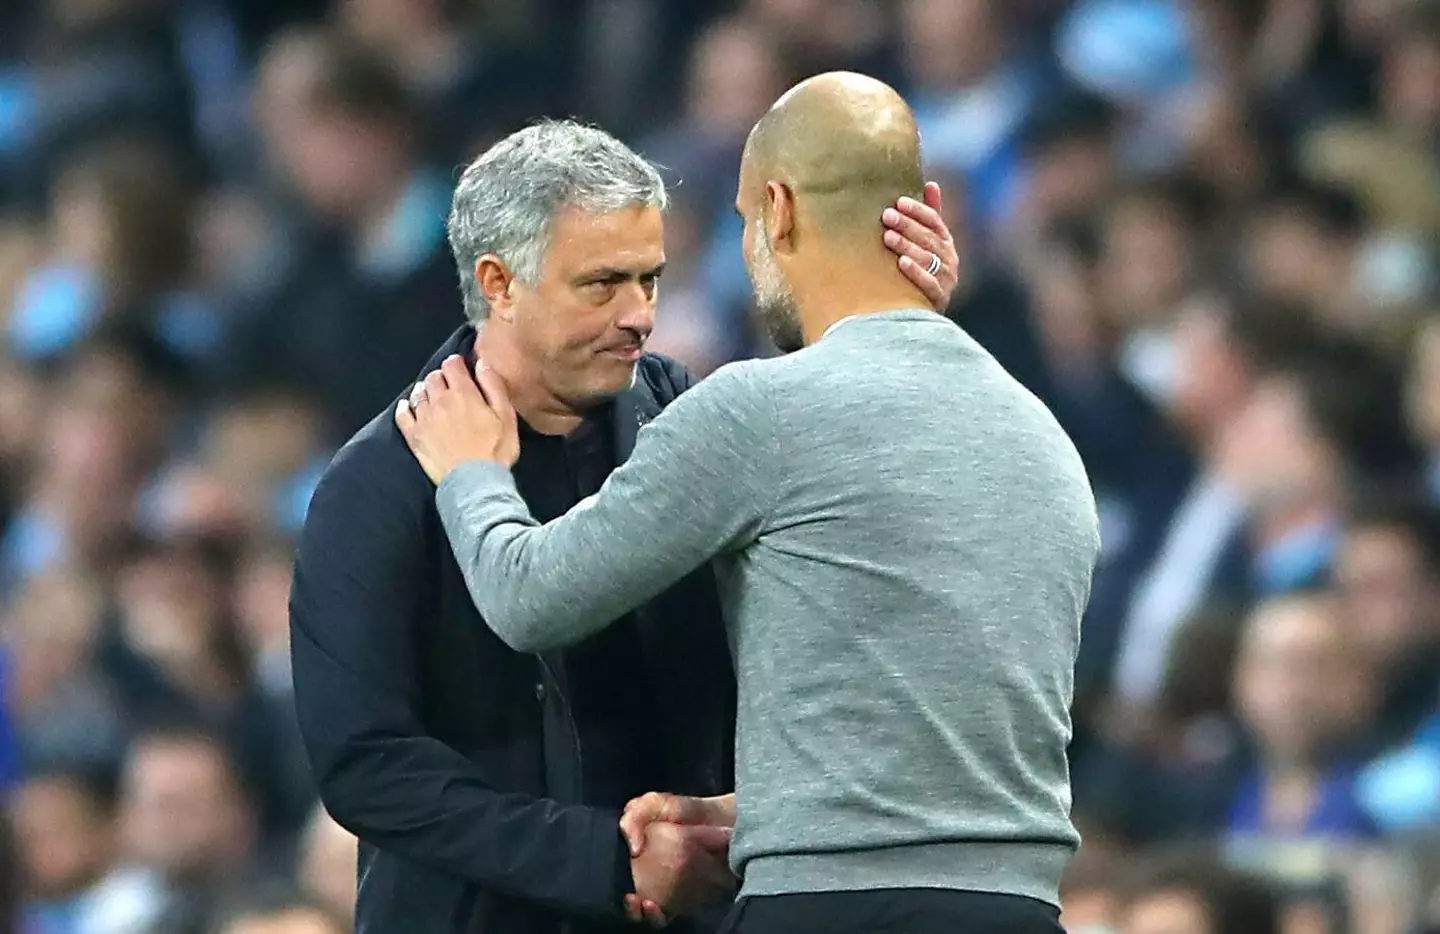 Jose Mourinho greets Pep Guardiola in a Manchester derby. PA Images / Alamy